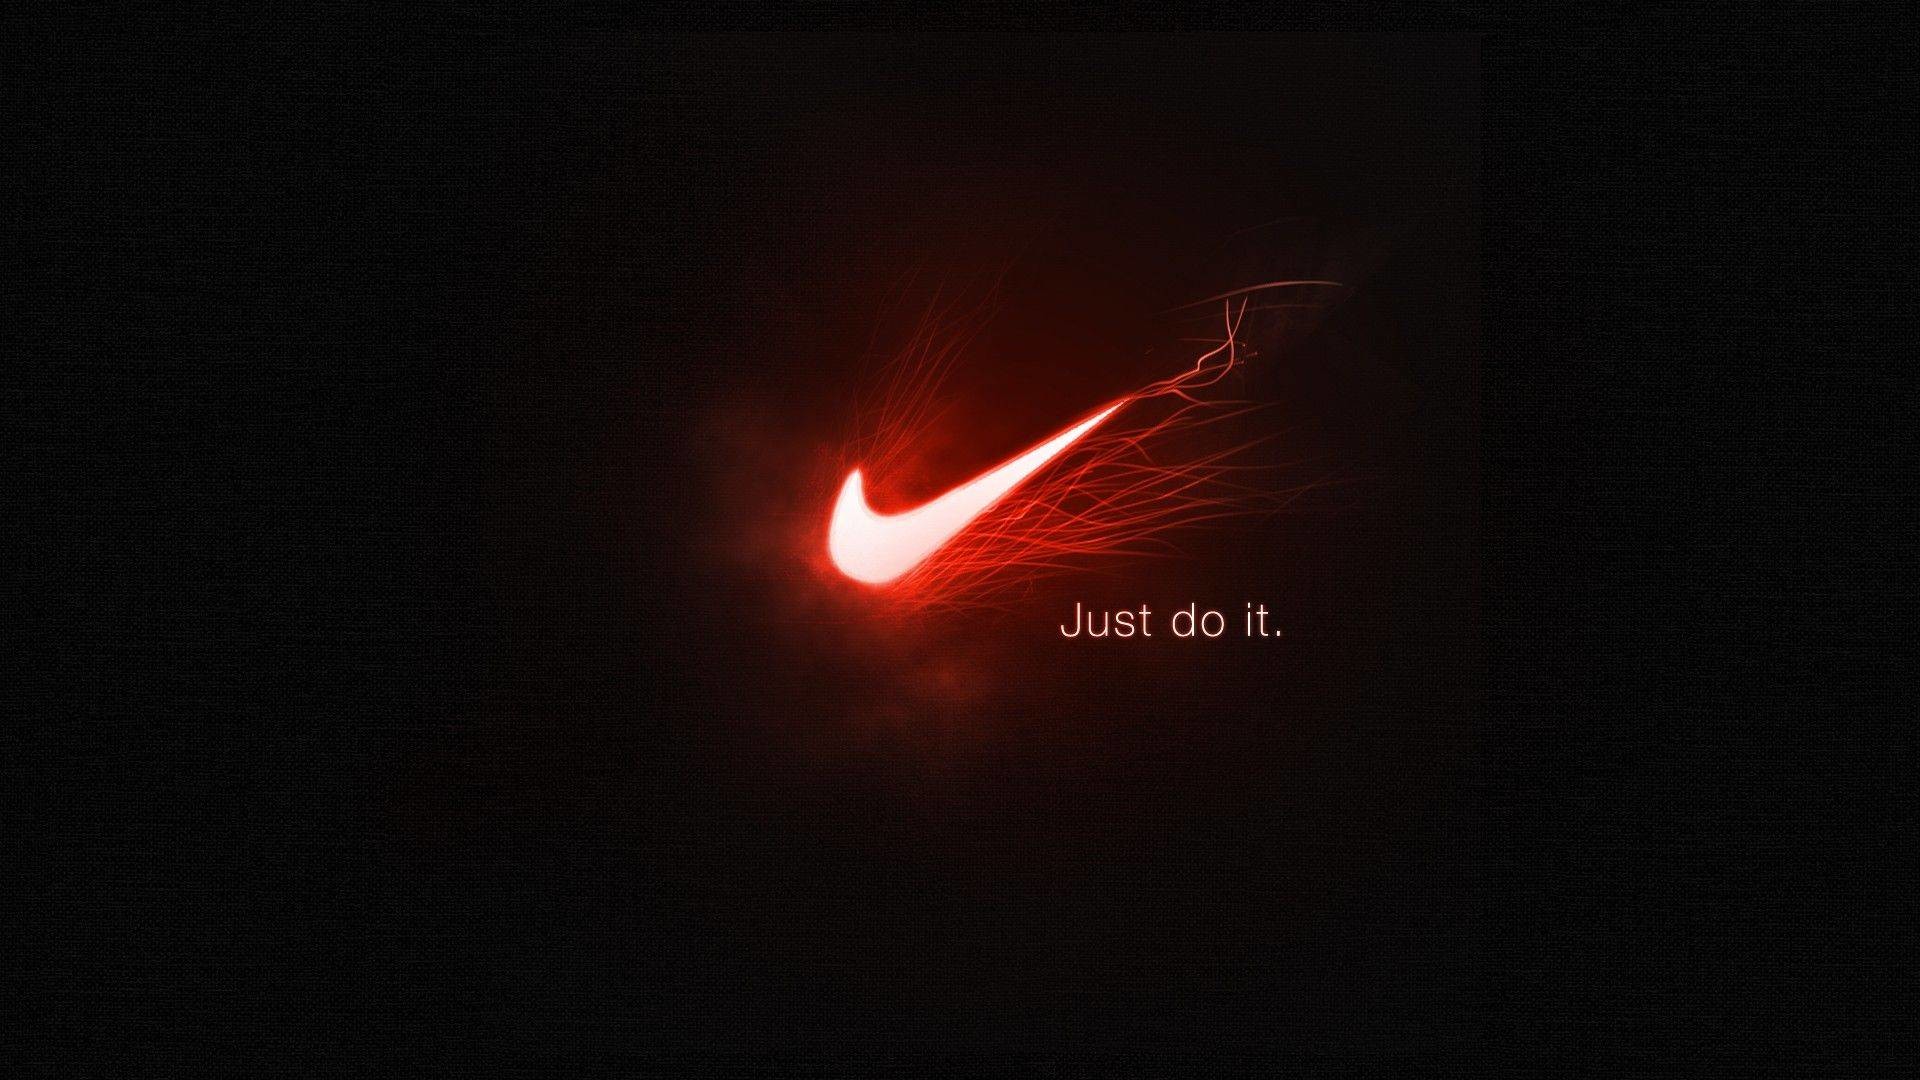 1920x1080 ... Nike Logo Wallpapers HD 2015 free download - Page 3 of 3 .